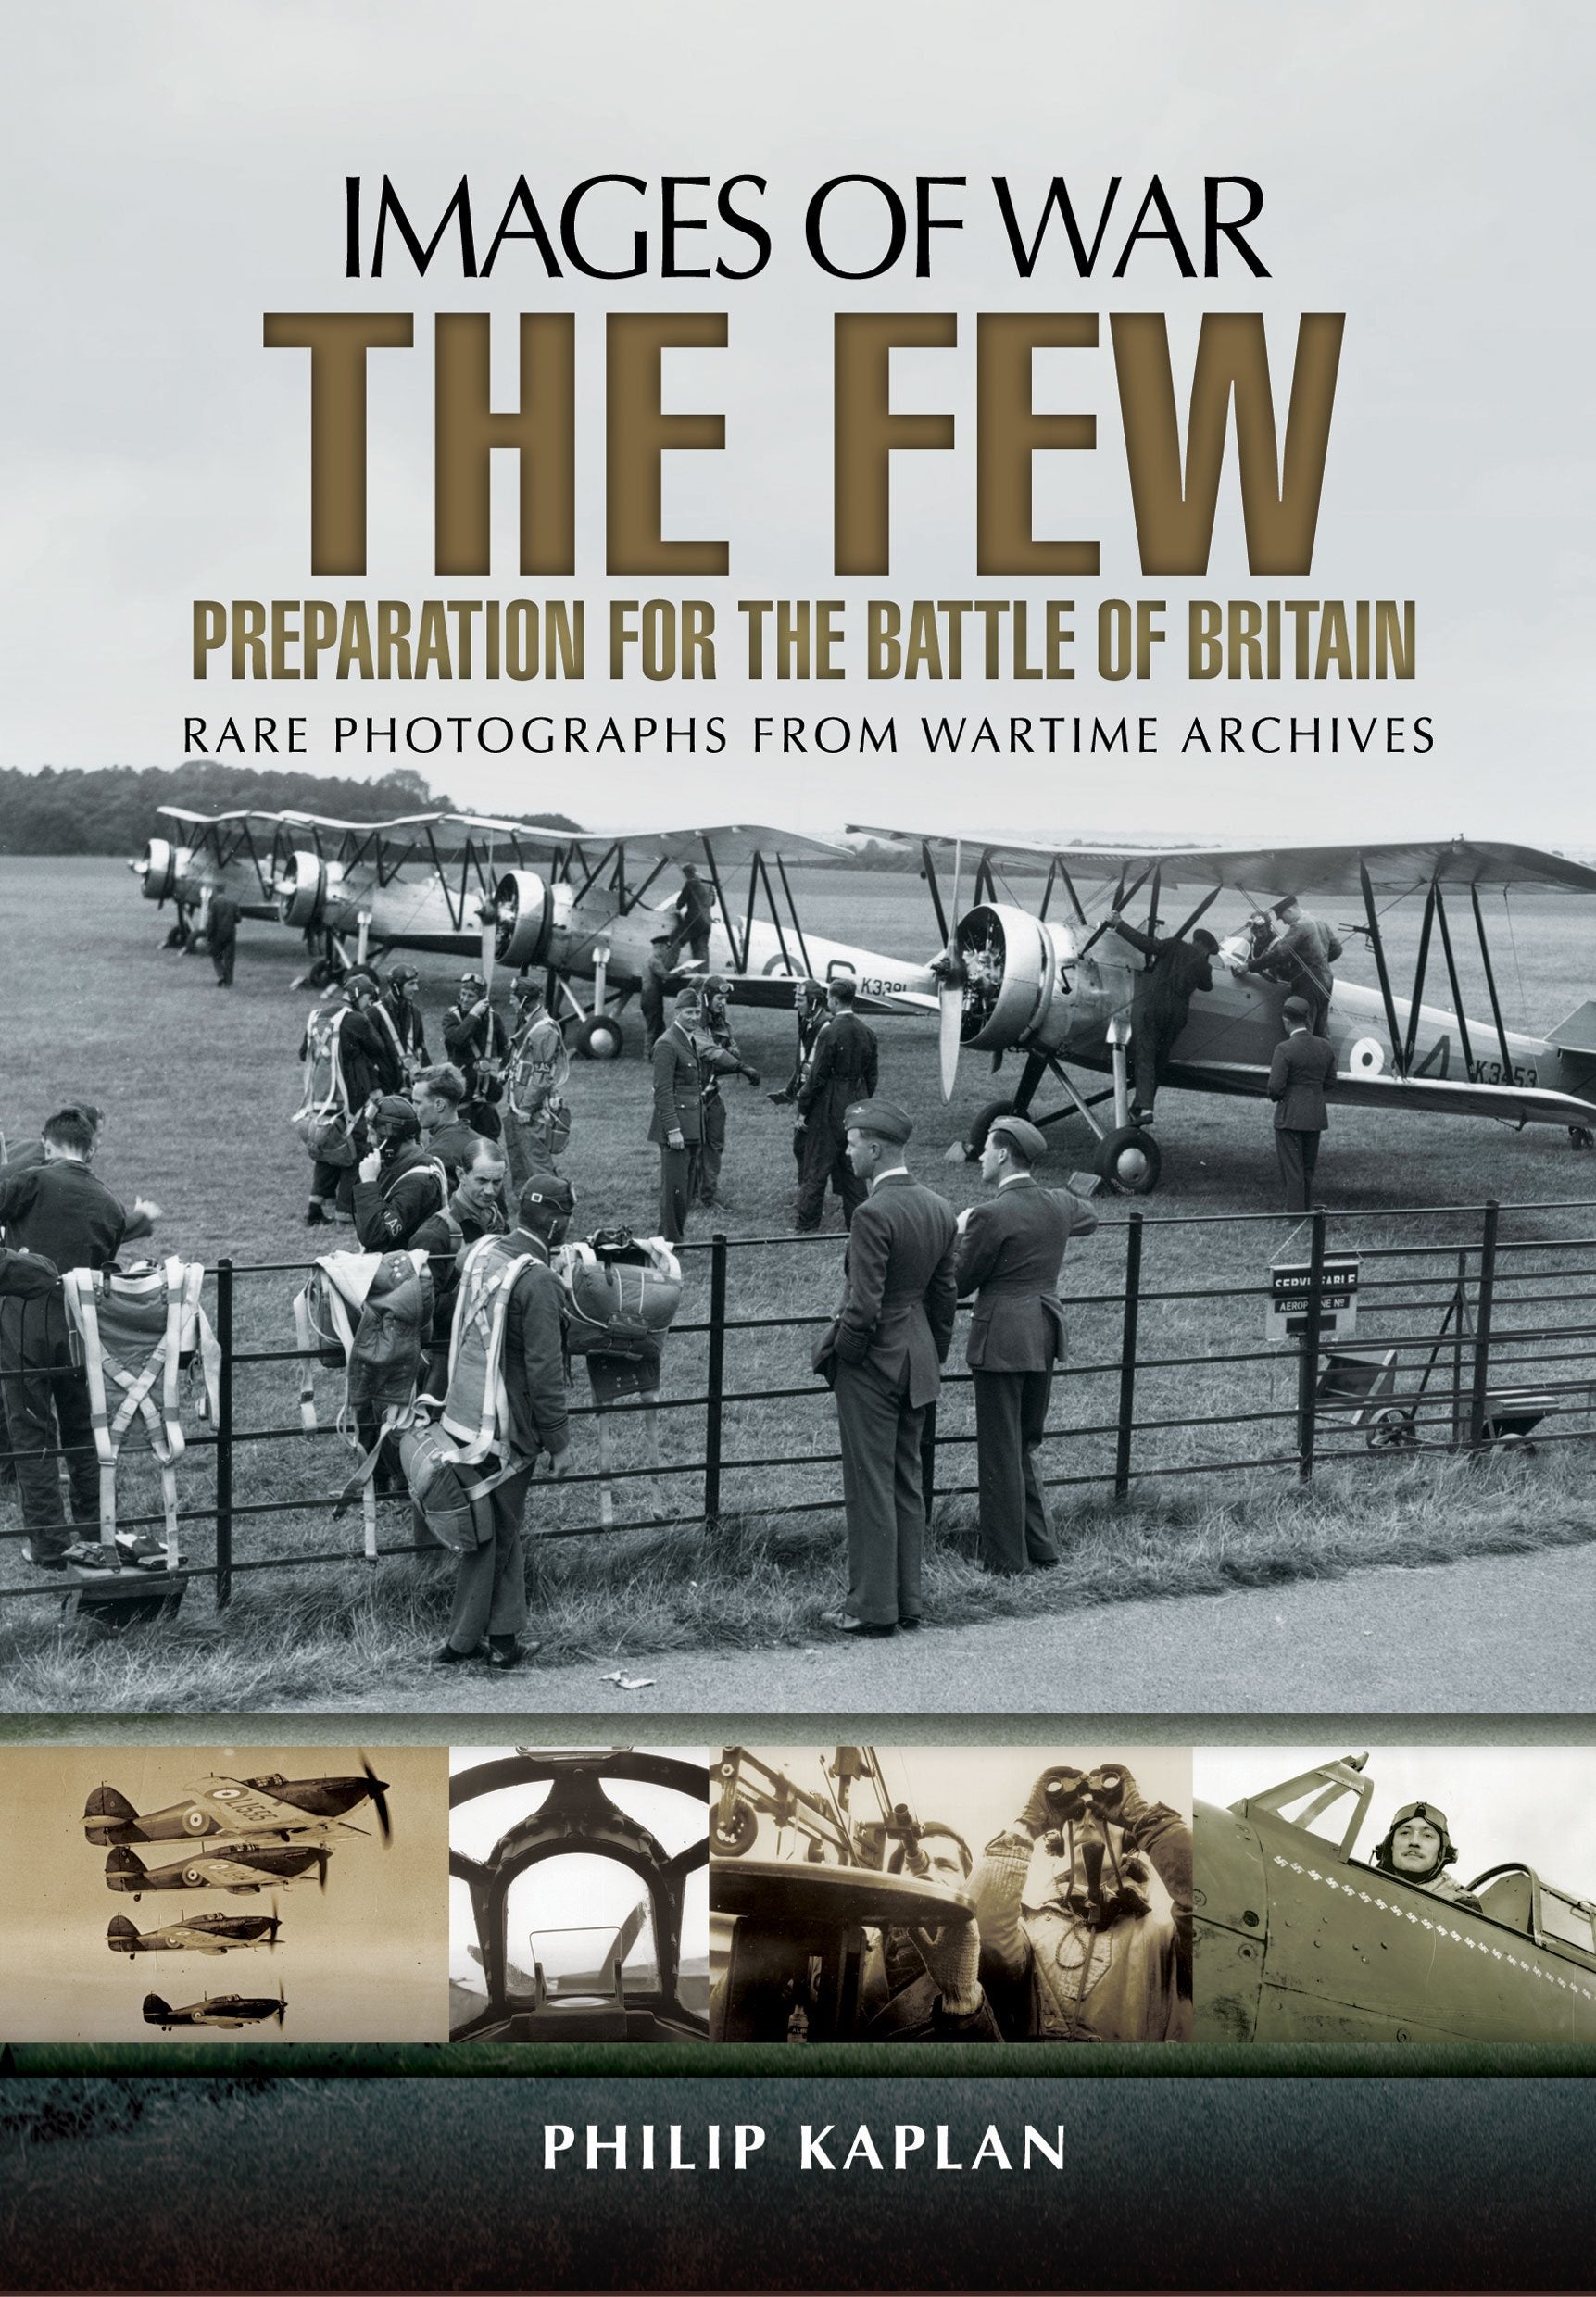 Few: Preparation for the Battle of Britain (Images of War)